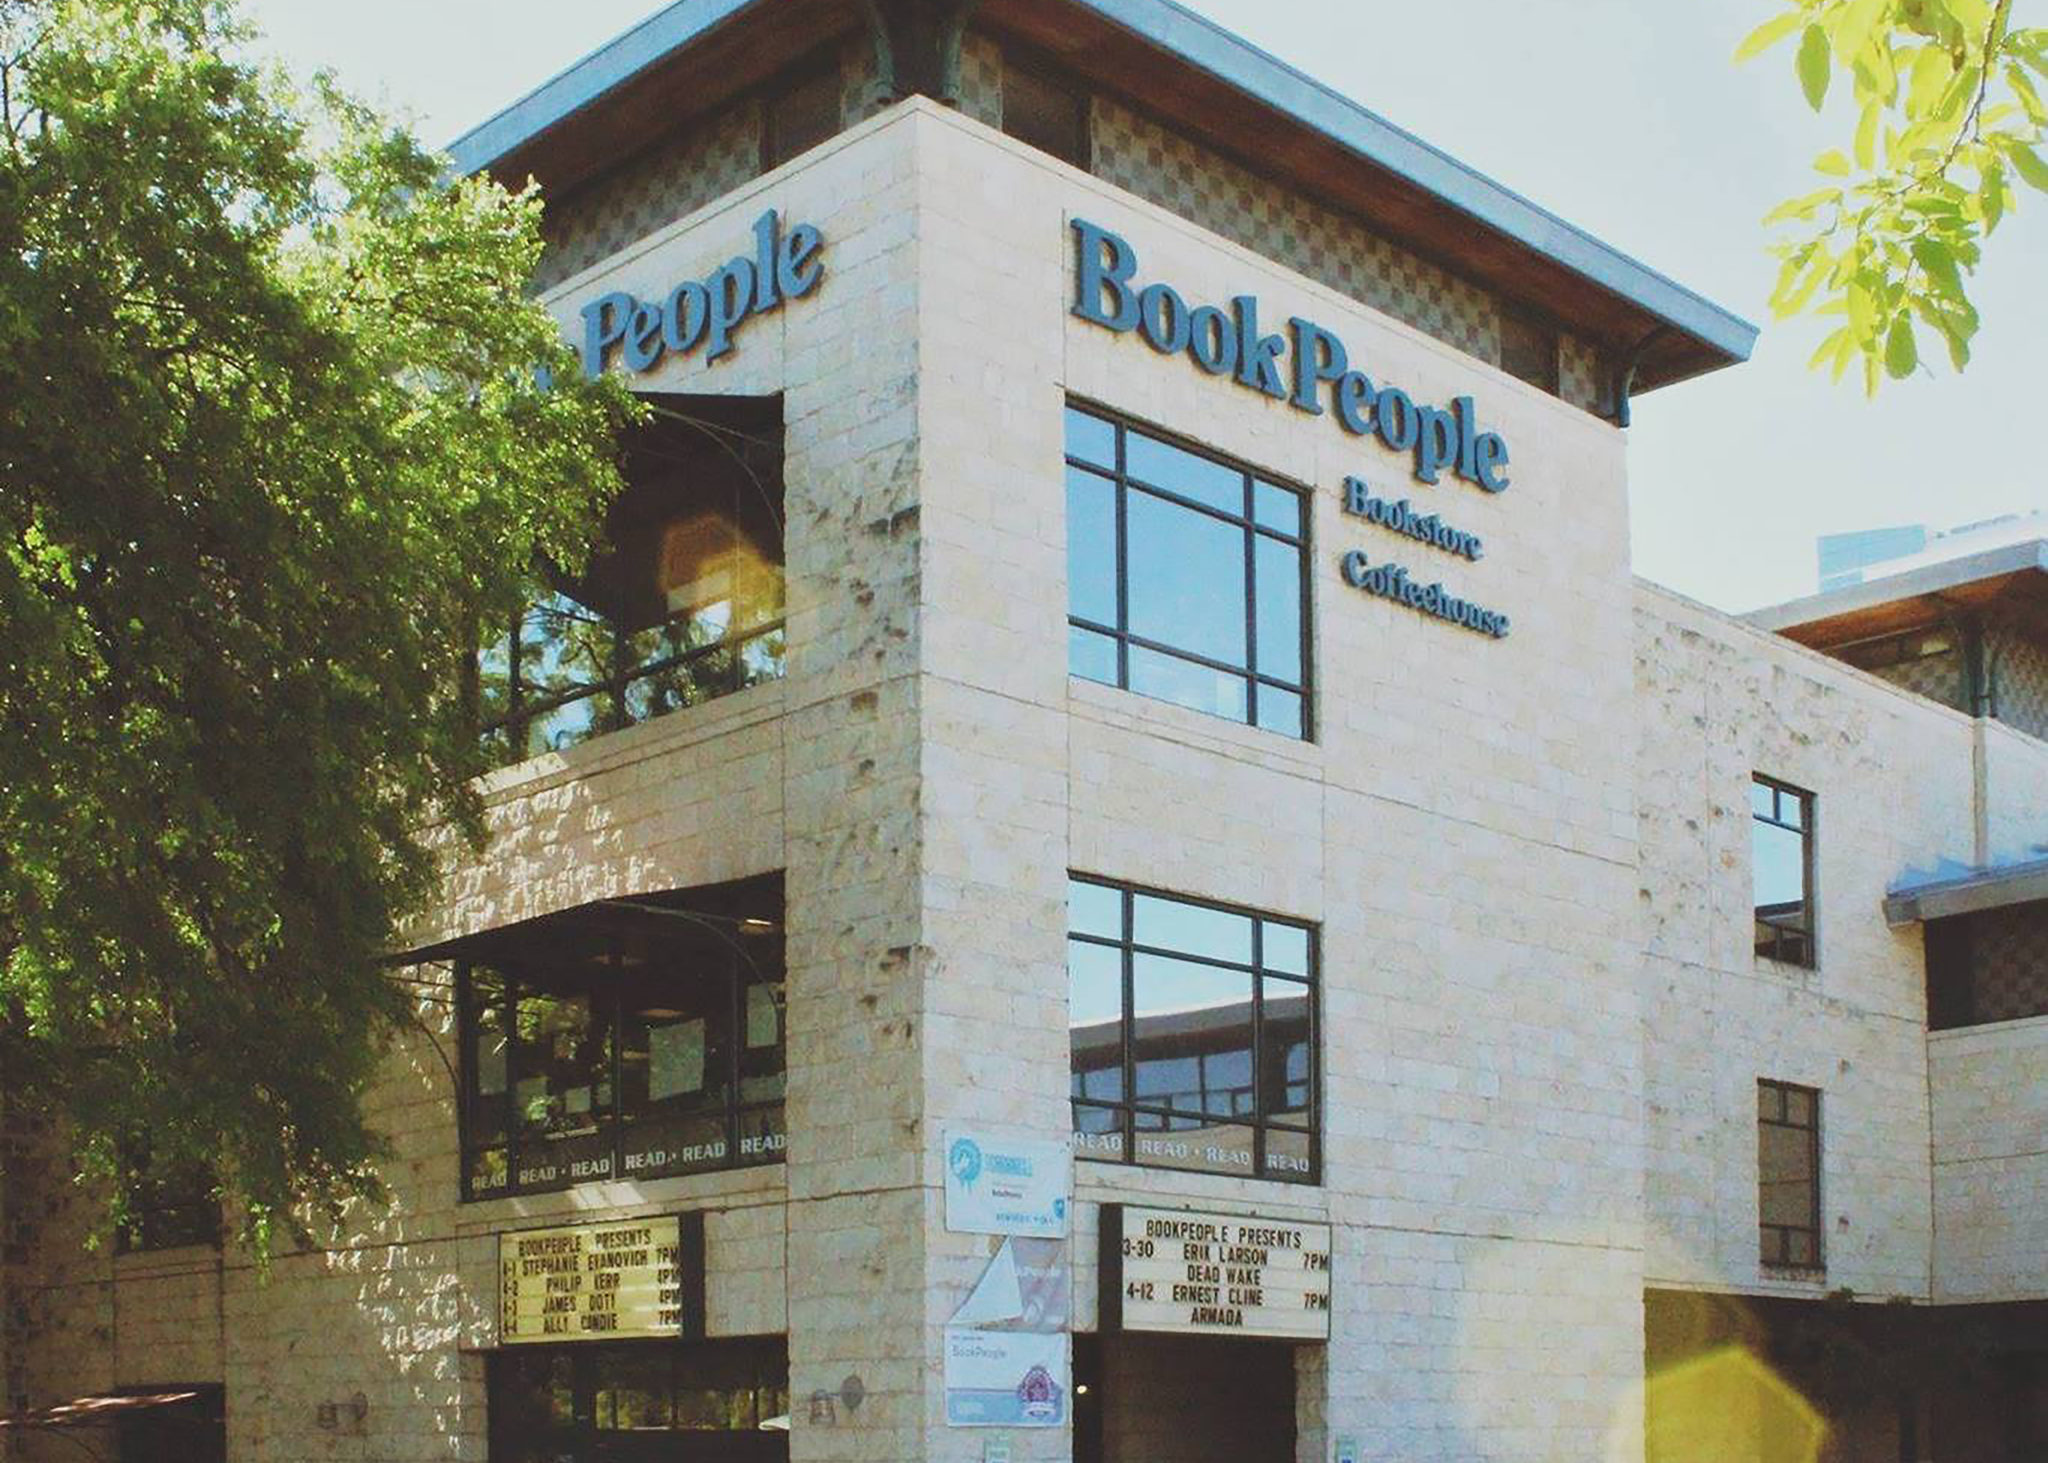 Book People bookstore